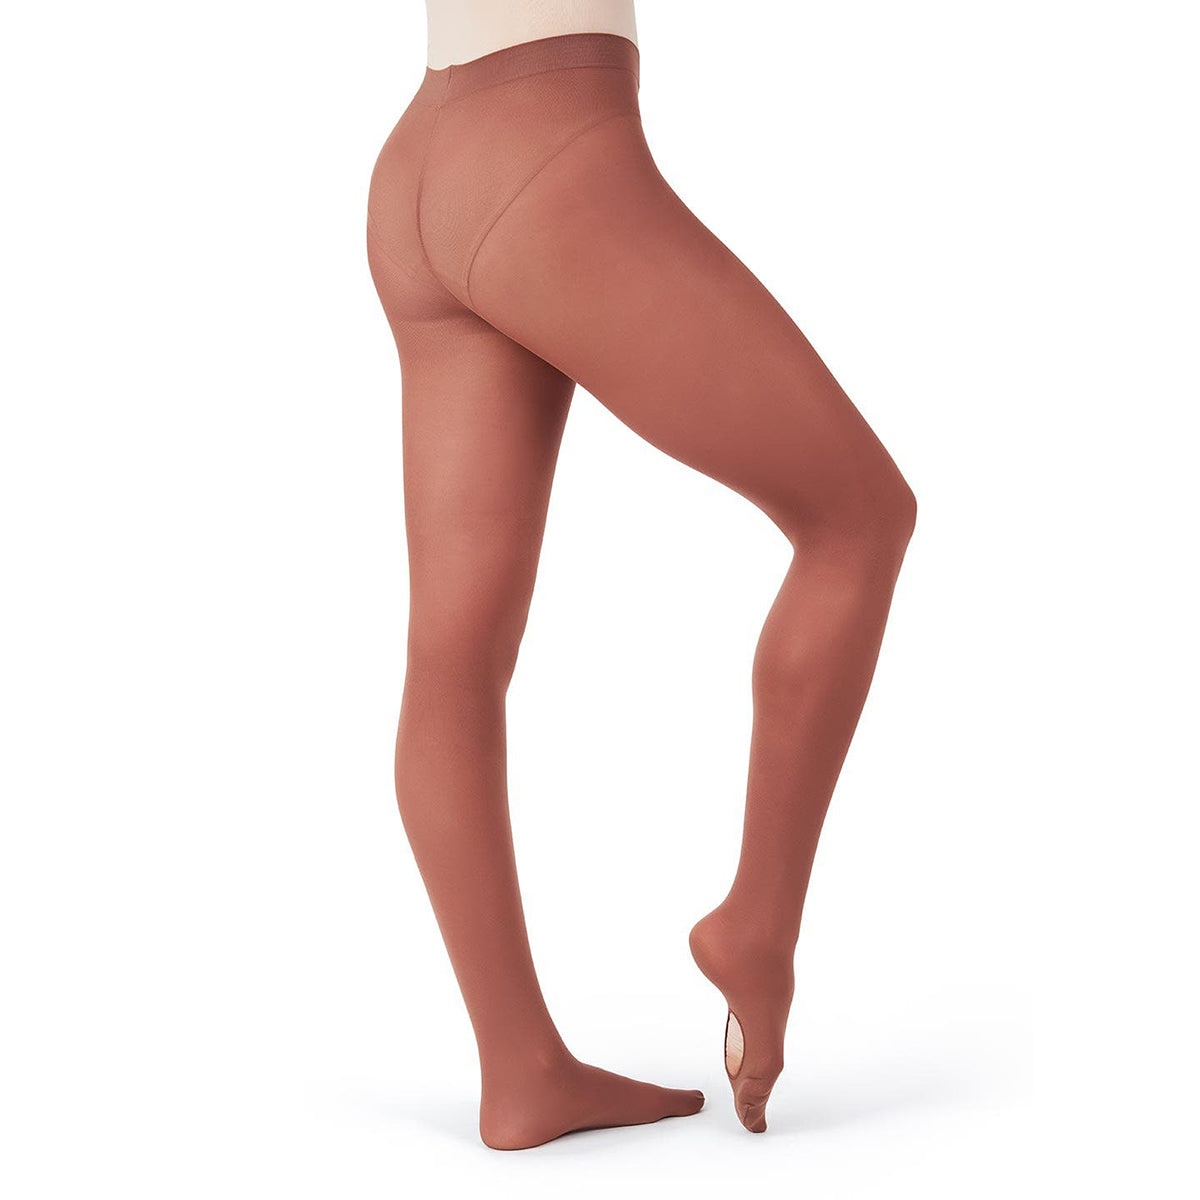 Capezio Women's Ultra Soft Transition Dance Tights - Additional Colors, 3  pack